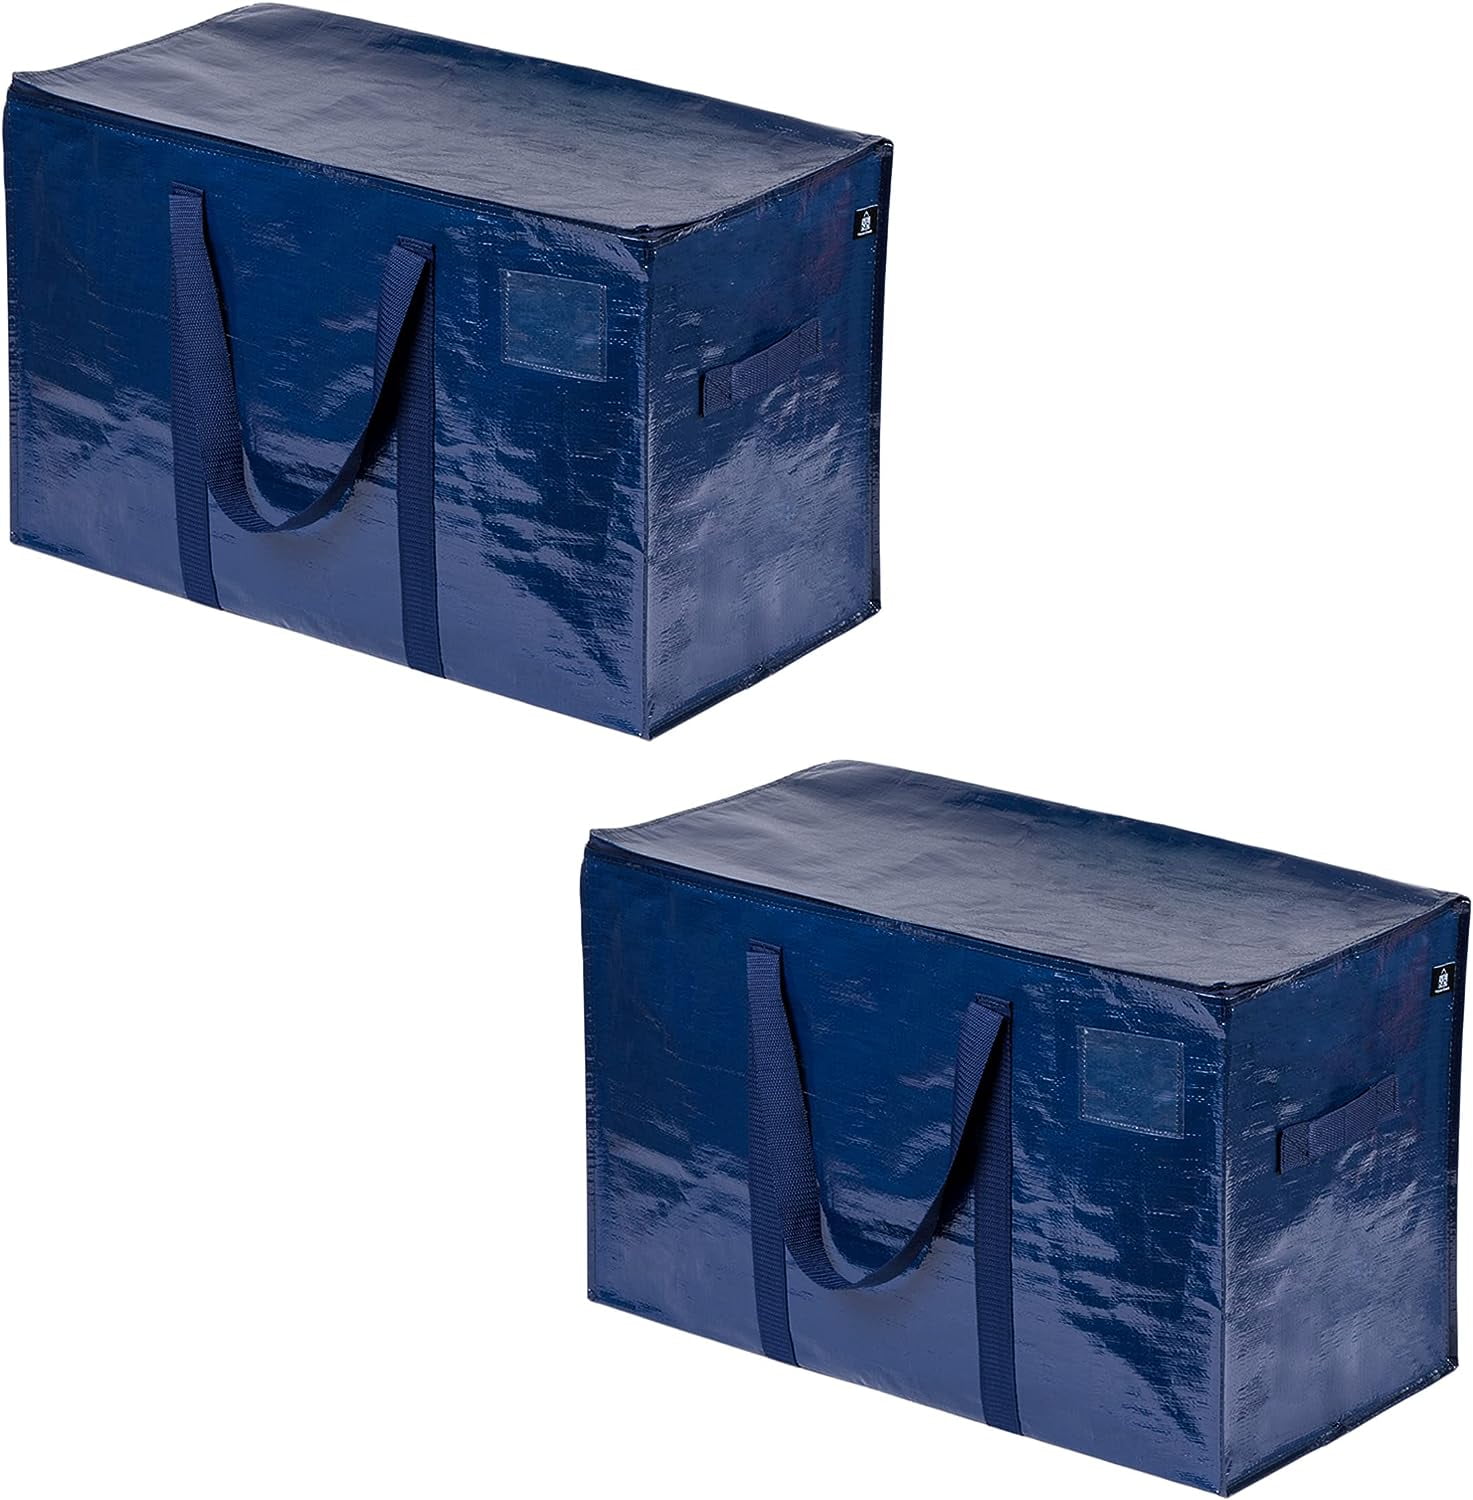 Veno 4 Pack XL Heavy Duty Foldable Moving Storage Zipper Bag w/ Reinforced Structure Alternative to Moving Box (Clear)